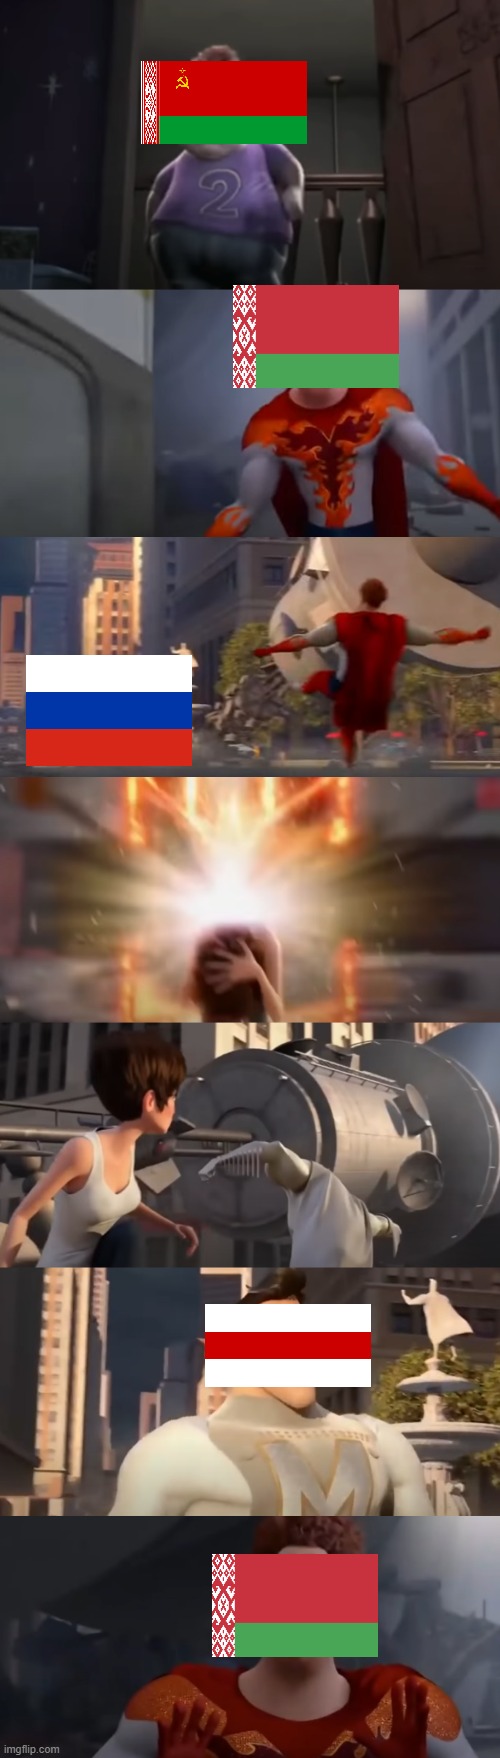 Belarus glow up | image tagged in snotty boy glow up meme extended | made w/ Imgflip meme maker